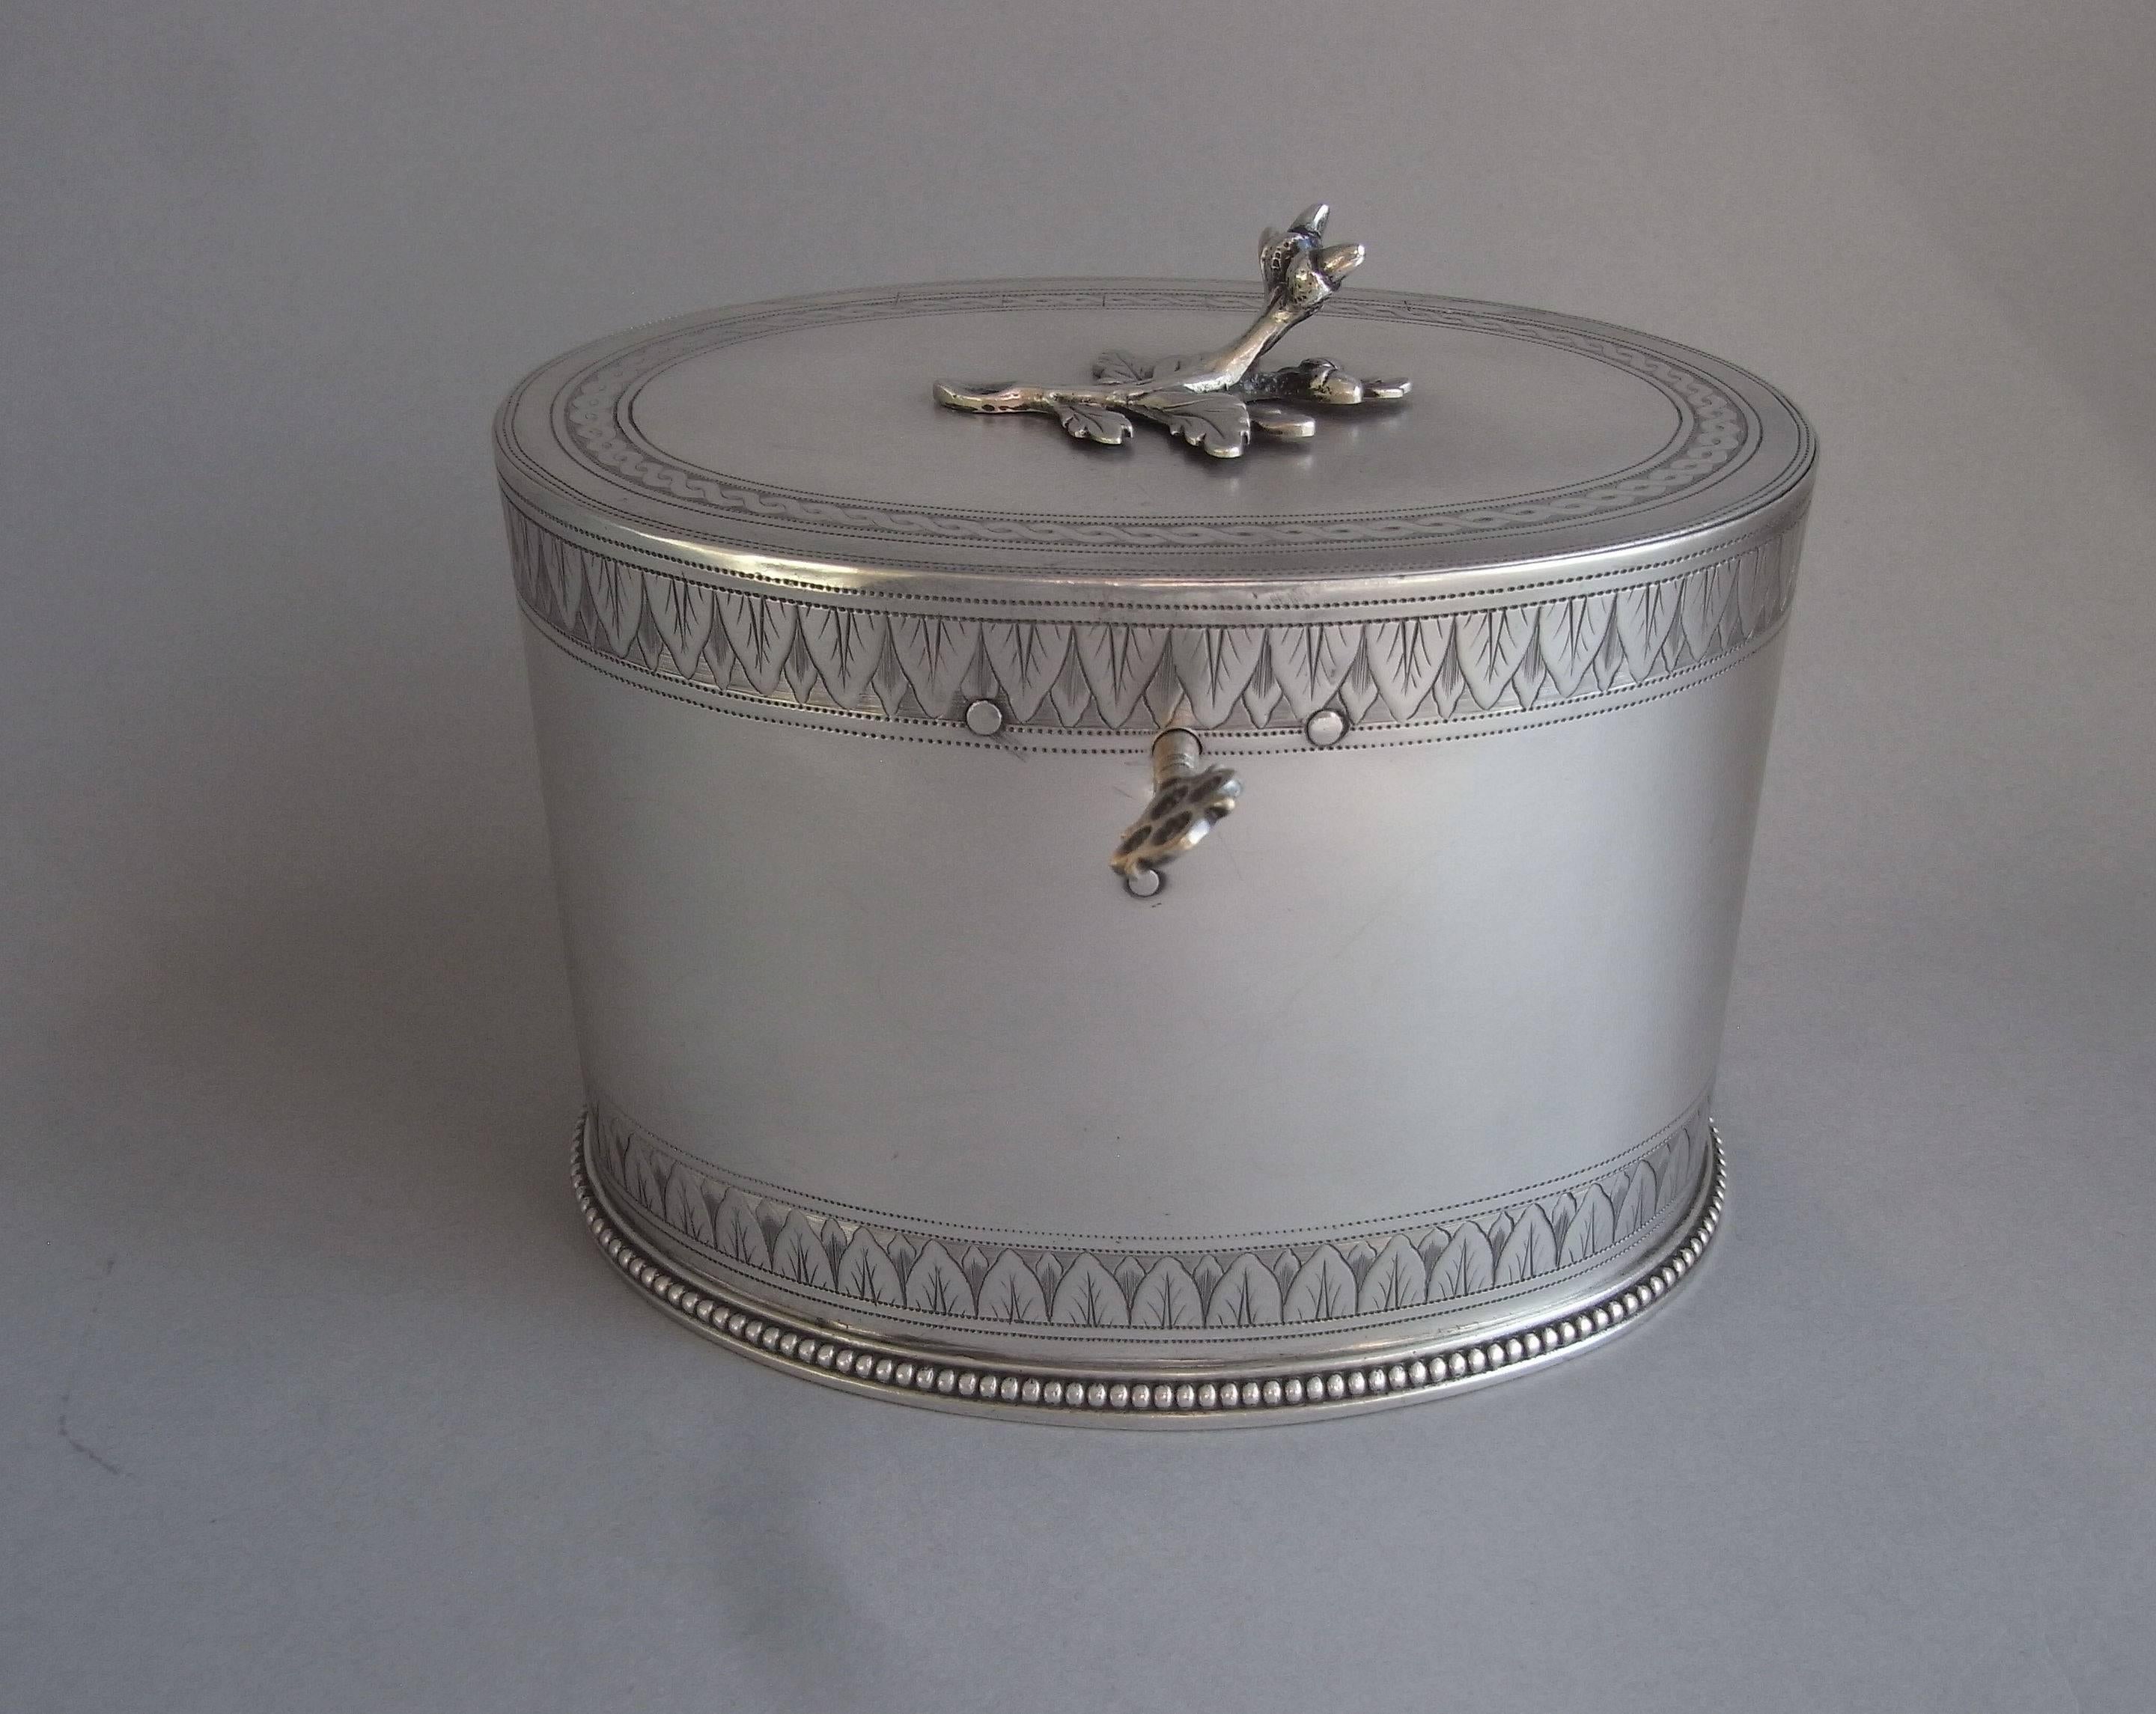 English Very Rare and Unusual George III Tea Caddy Made in by Hester Bateman